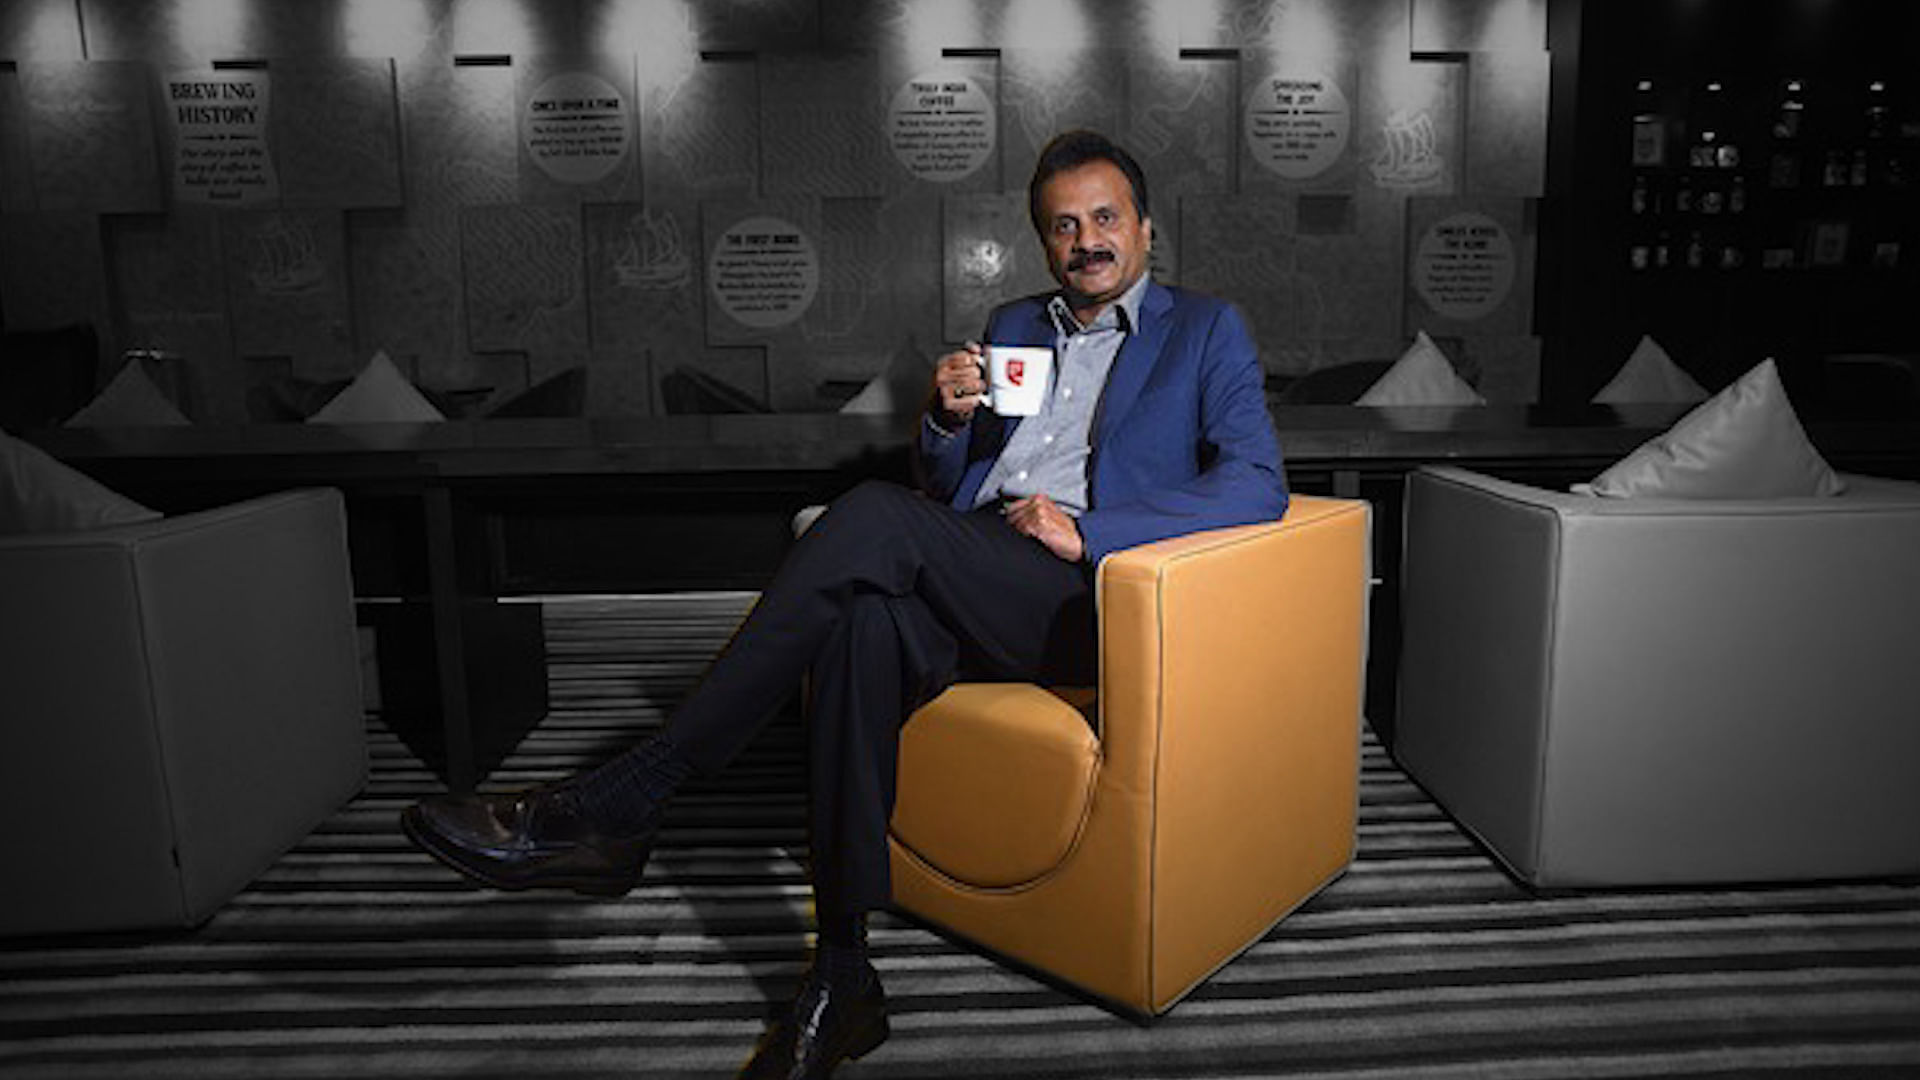 Here’s a brief account of the life and times of VG Siddhartha.